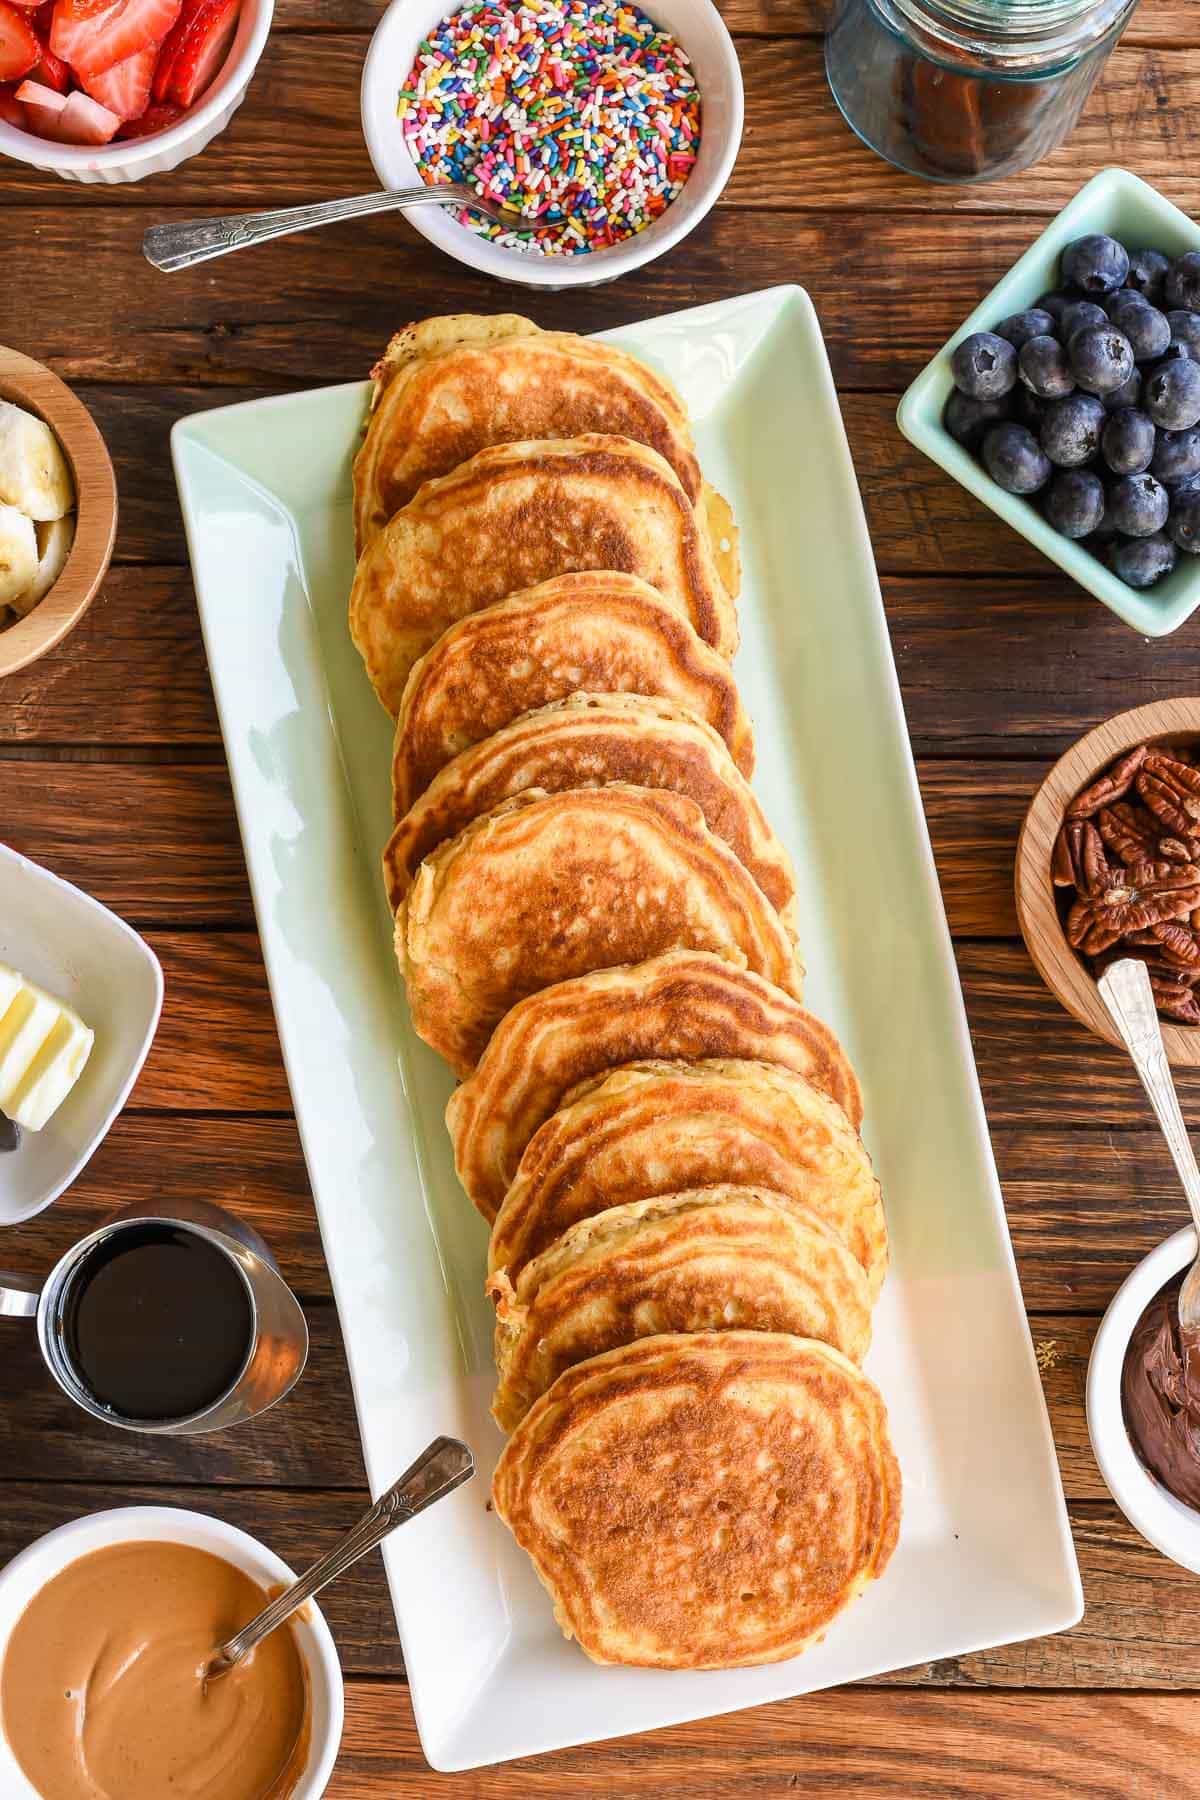 Large rectangular platter filled with fresh buttermilk pancakes with bowls of pancake toppings surrounding it.